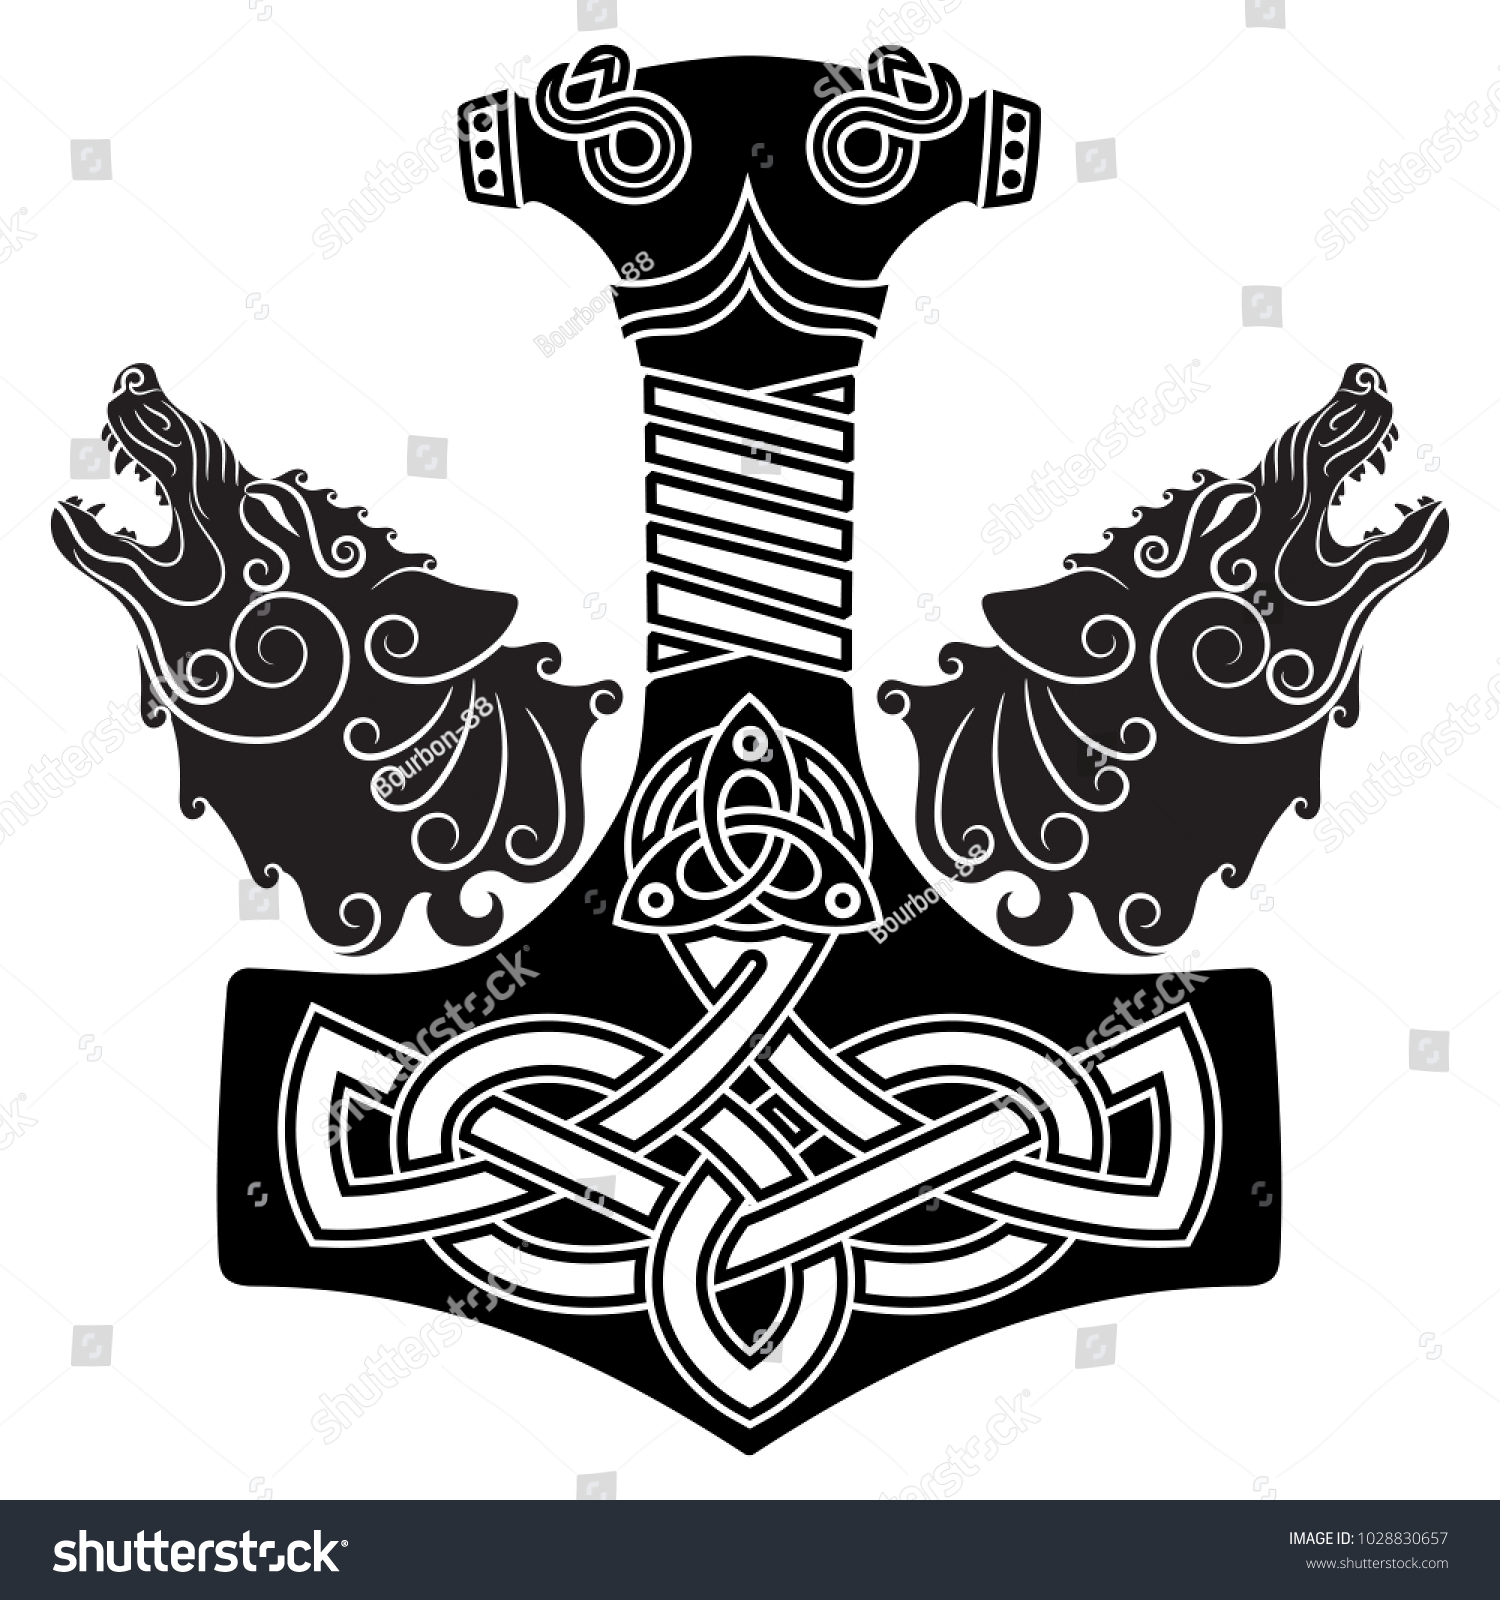 SVG of Thor s hammer - Mjollnir, Scandinavian ornament and two wolfs, isolated on white, vector illustration svg